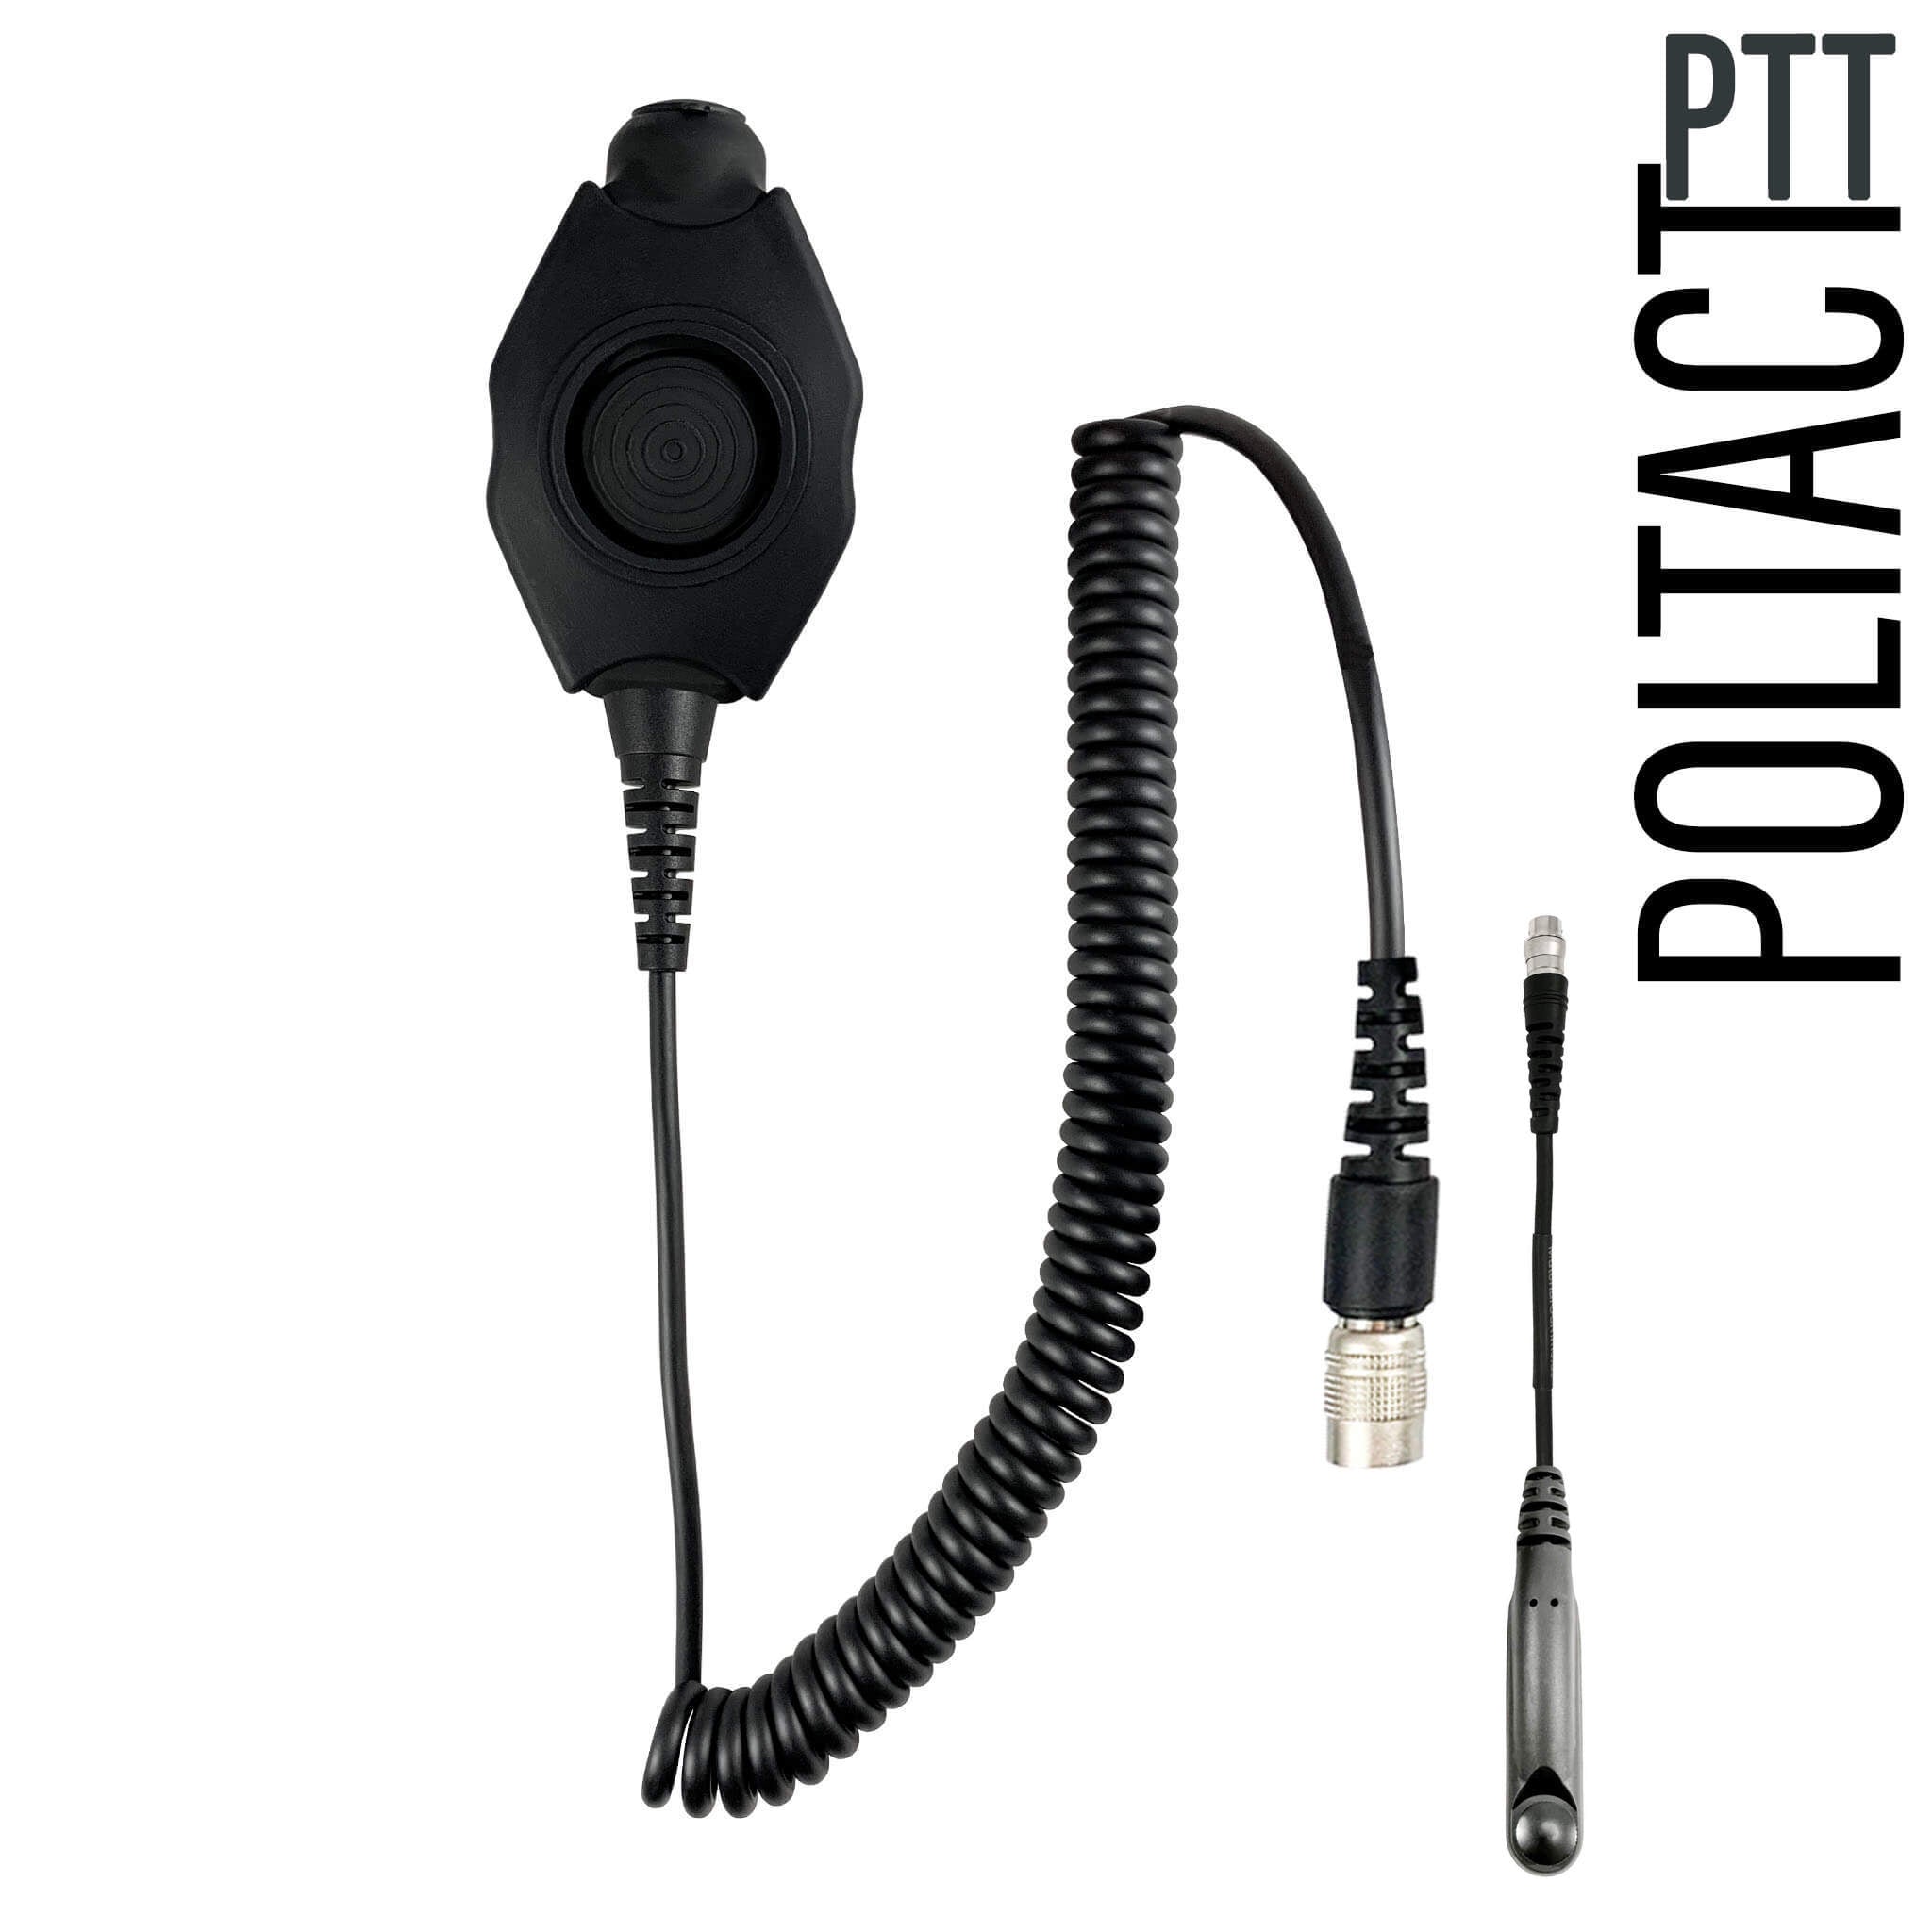 –　NA　Tactical　Gear　Quick　w/　Comm　for　Disconnect(Hirose):　Radio　Supply　Adapter/PTT　Headset